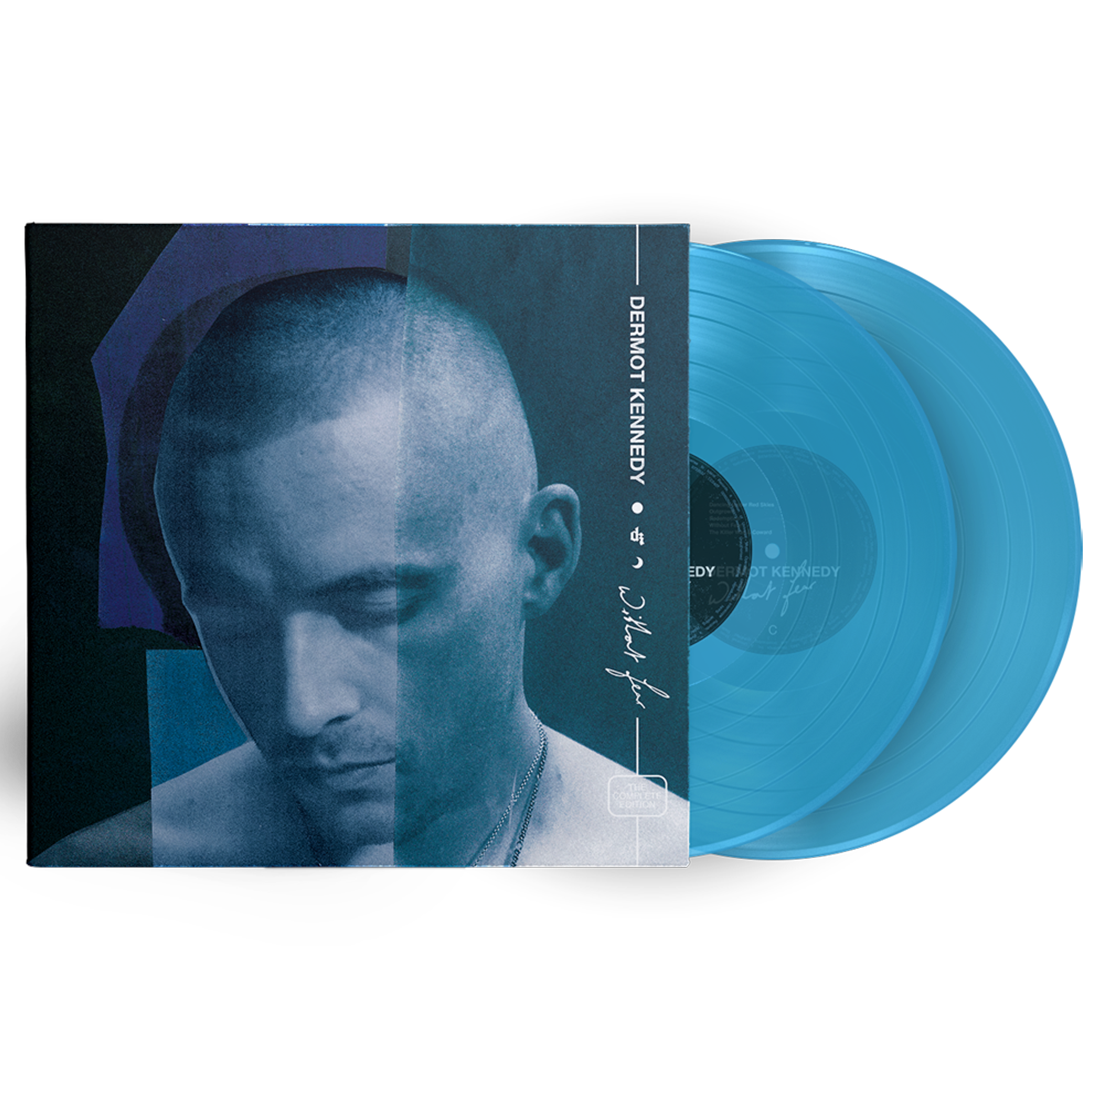 Dermot Kennedy - Without Fear: The Complete Edition Vinyl